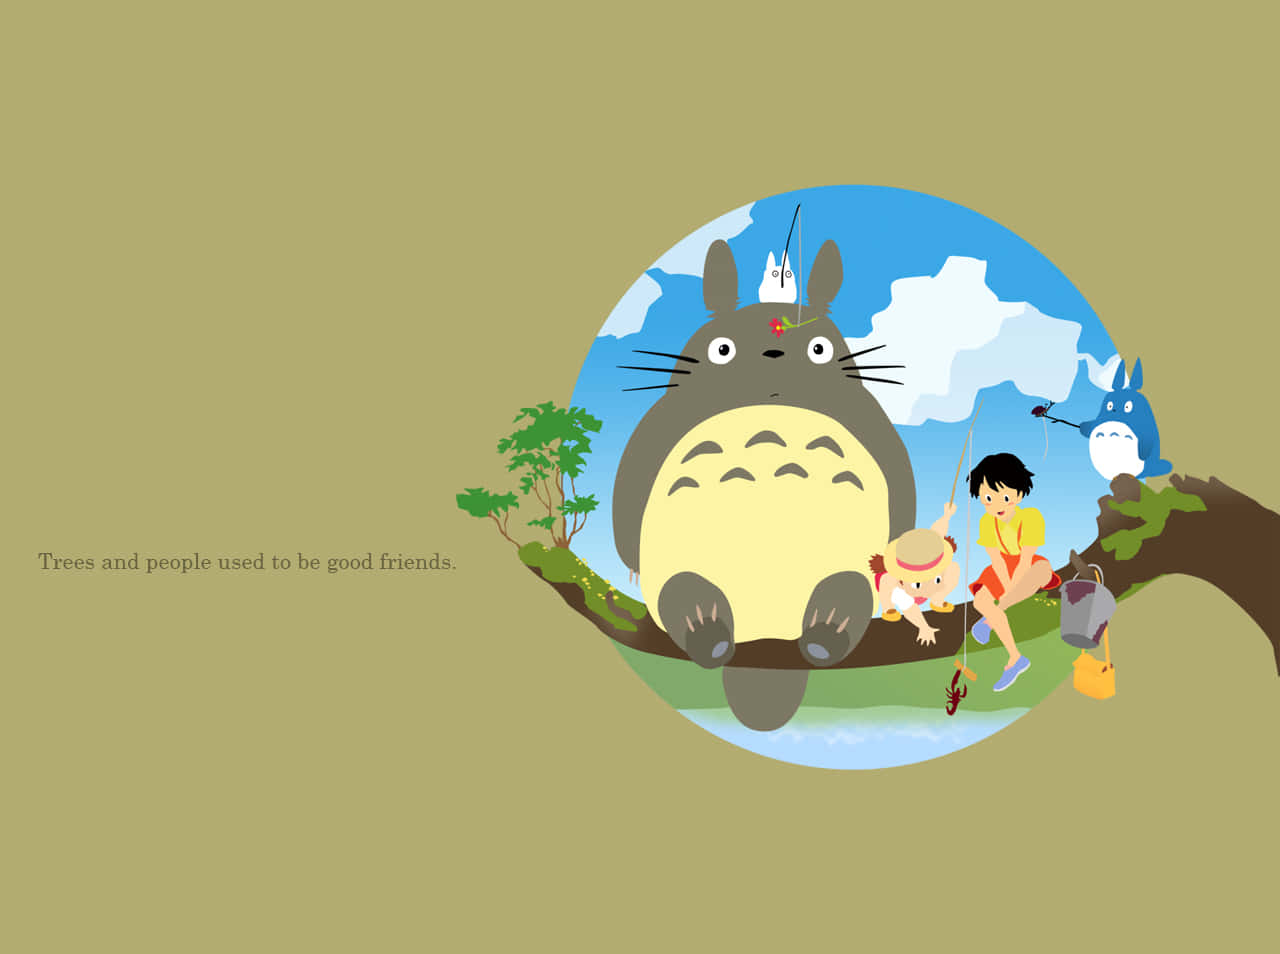 Share the Magic of Totoro with Friends and Family